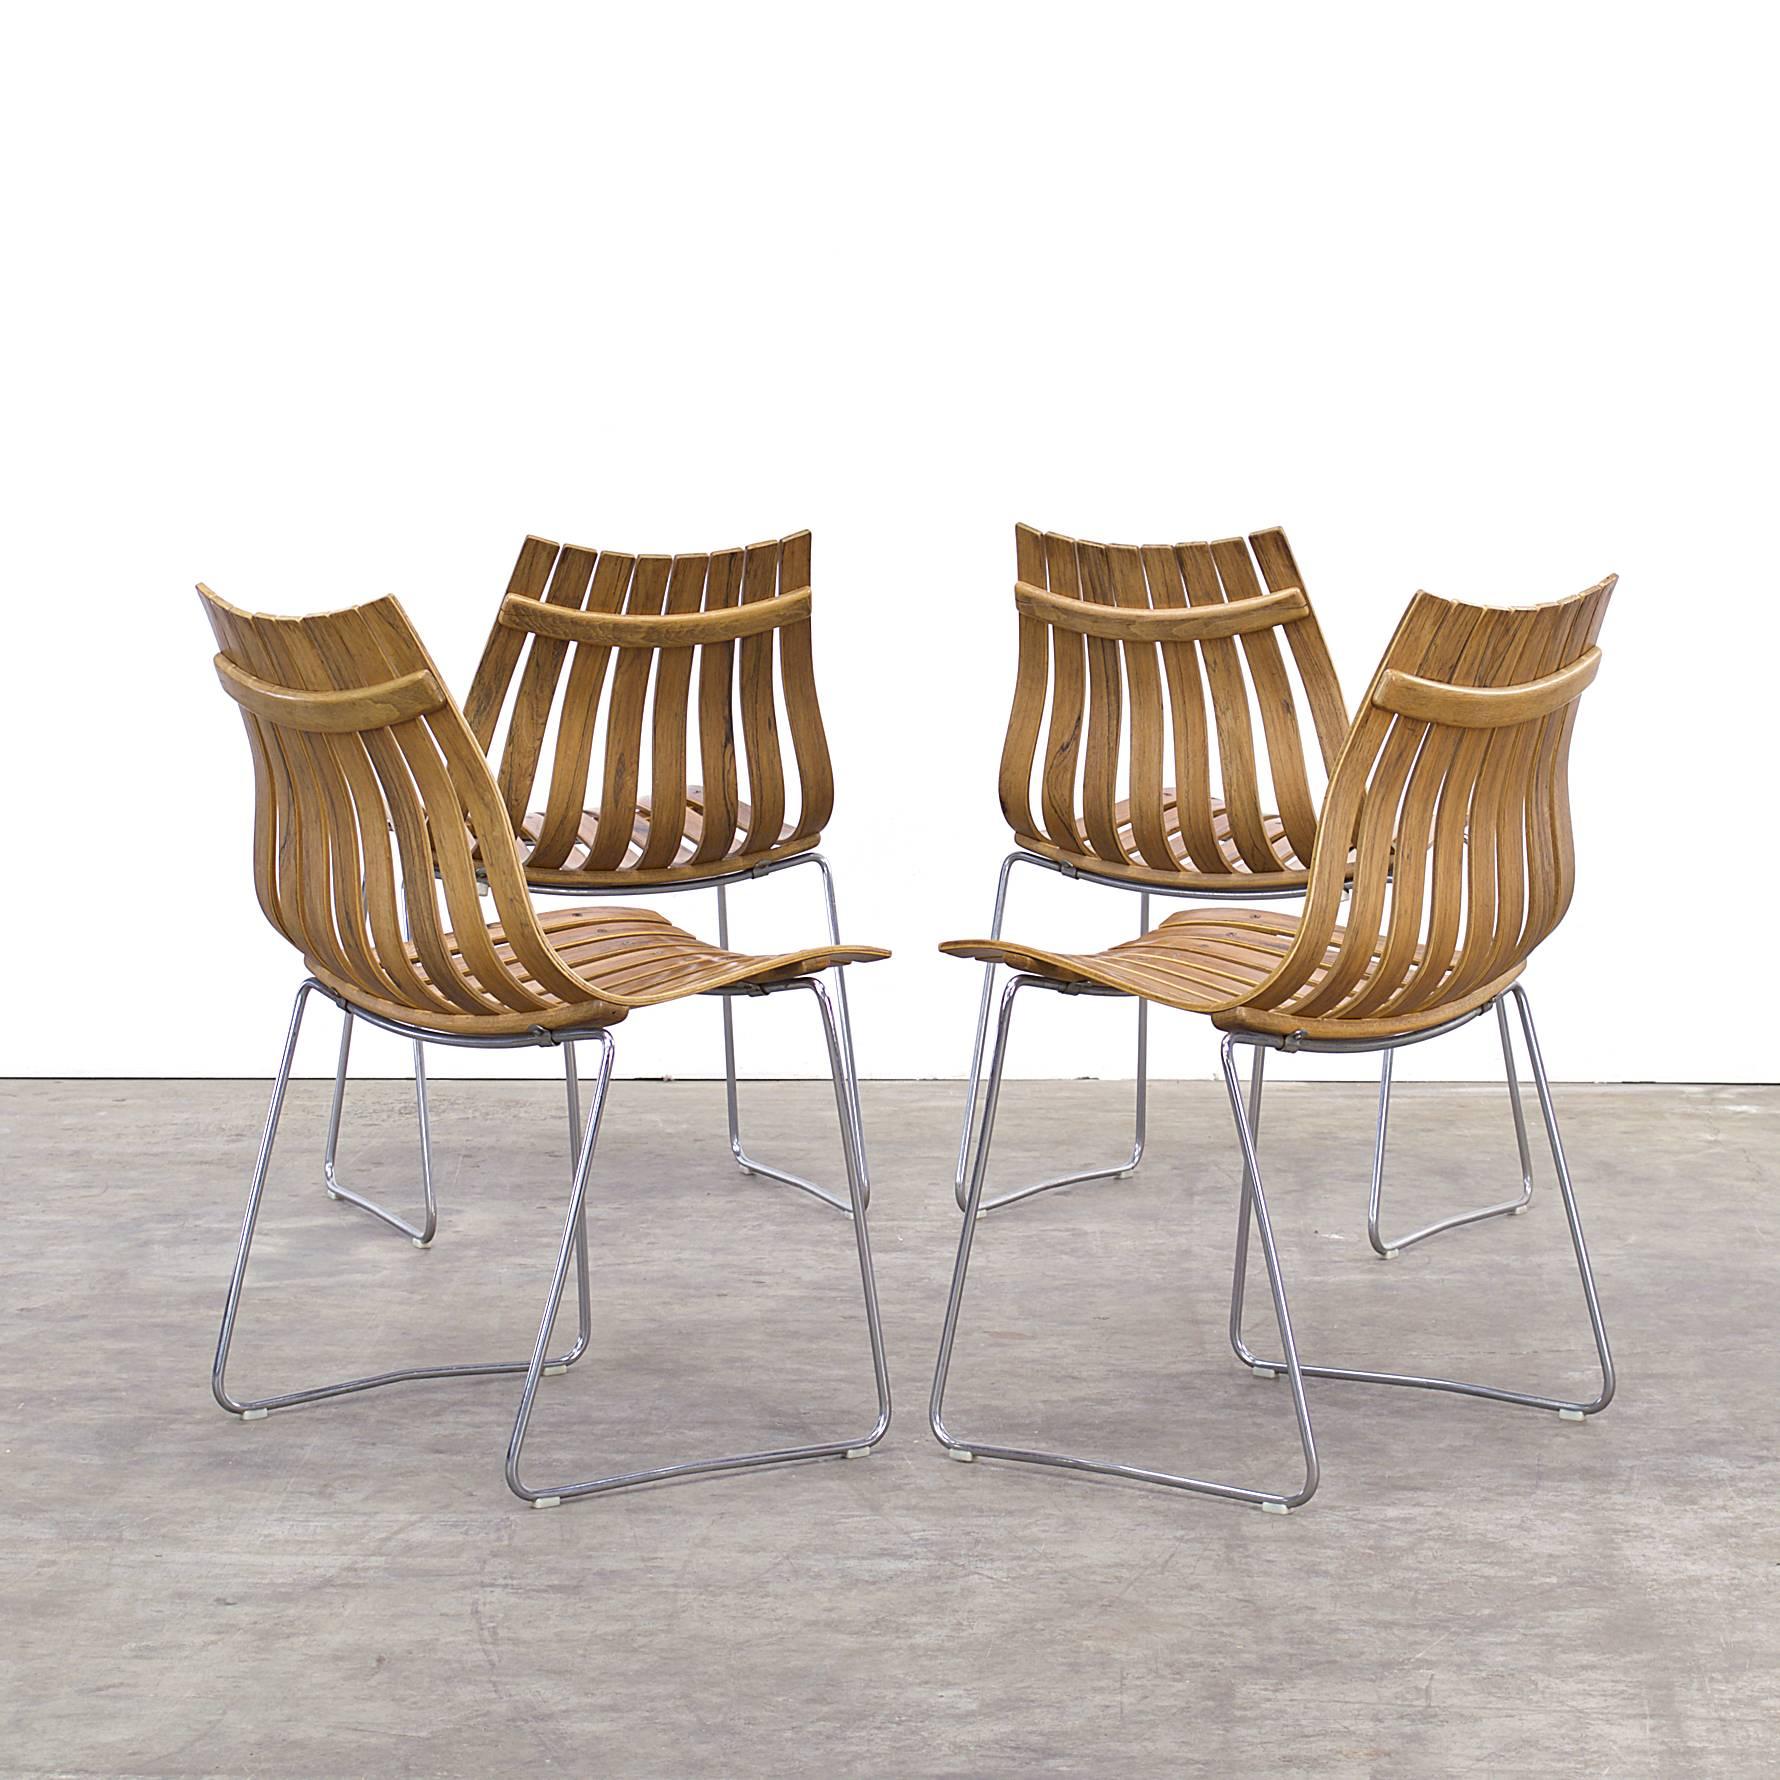 Mid-Century Modern 1950s Hans Brattrud ‘Scandia’ Chair Group of Four for Hove Möble For Sale